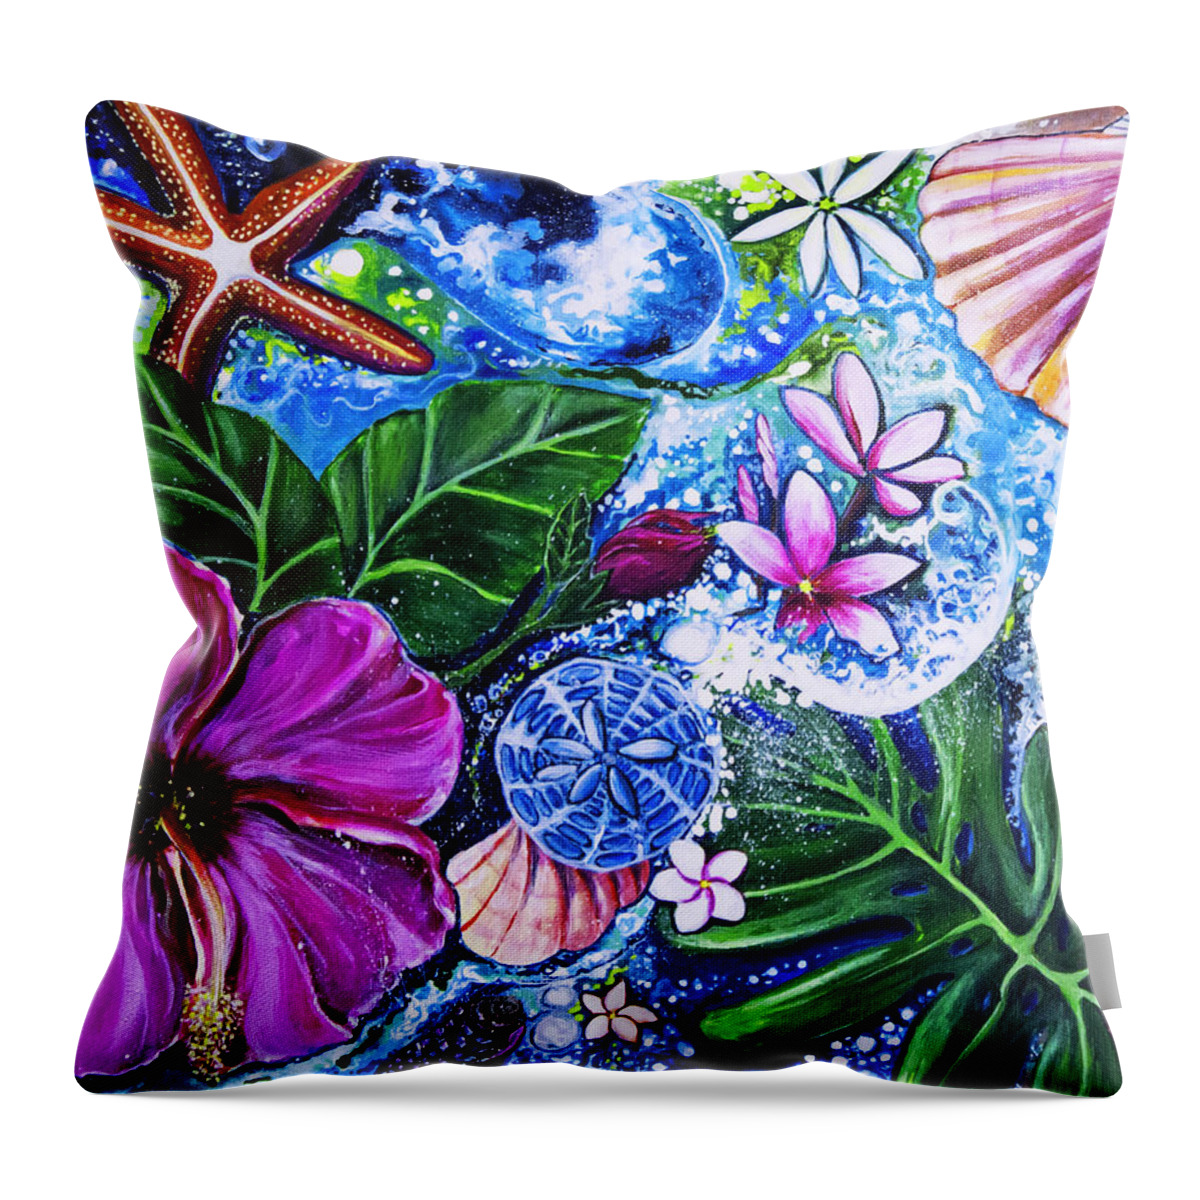 Hawaii Throw Pillow featuring the painting Hawaii Dream by Vivian Casey Fine Art